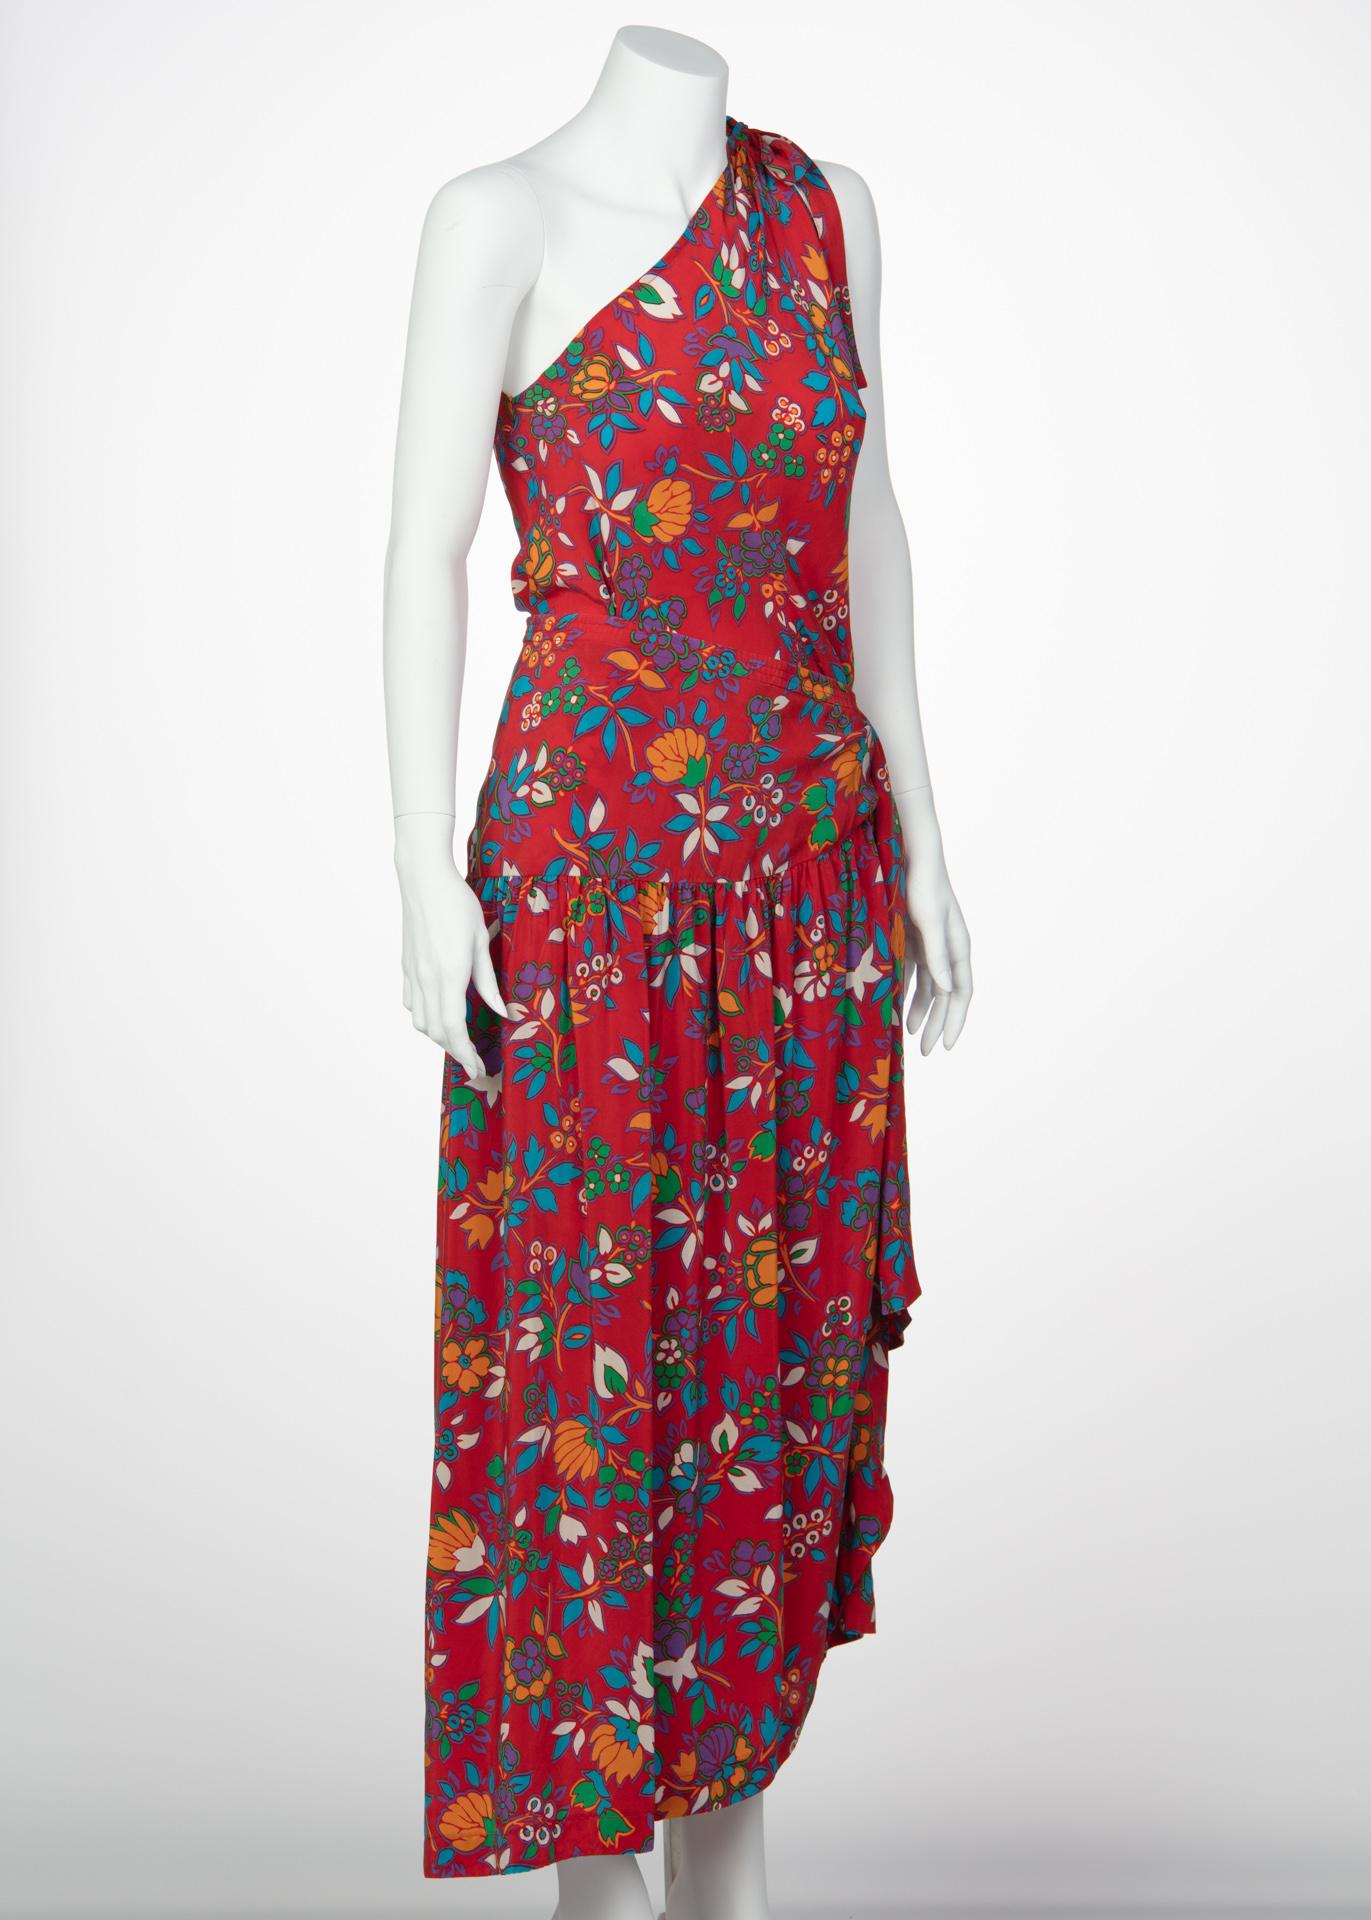 Yves Saint Laurent YSL Multicolor Floral Print Top and Skirt Set, 1980s  For Sale 6